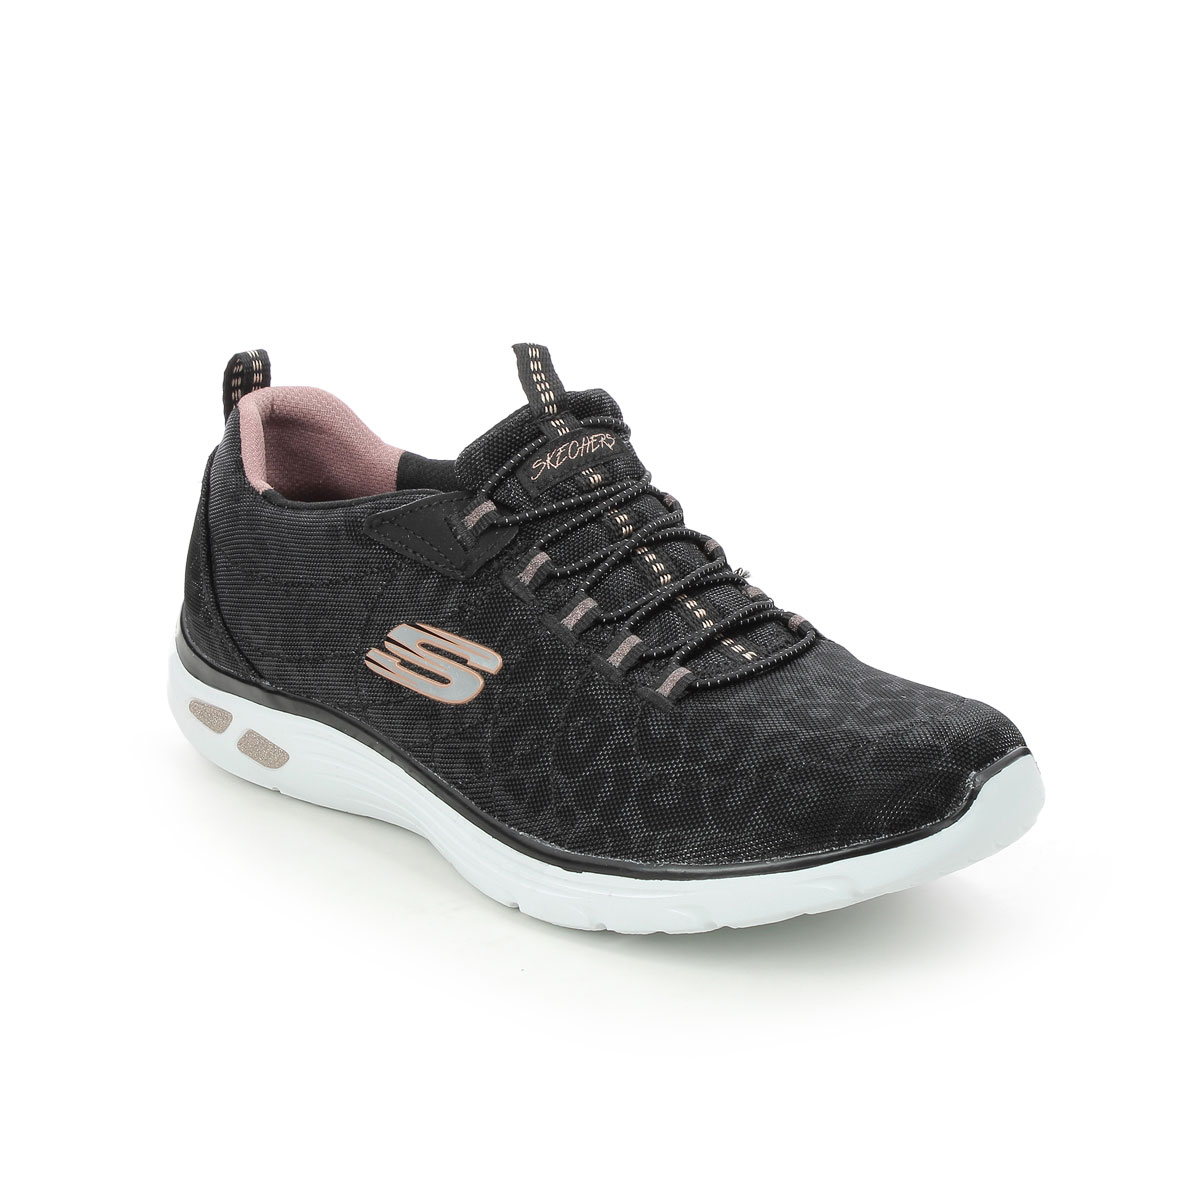 Skechers Empire Delux Spotted Relaxed Black Rose Gold Womens Trainers 12825 In Size 7 In Plain Black Rose Gold